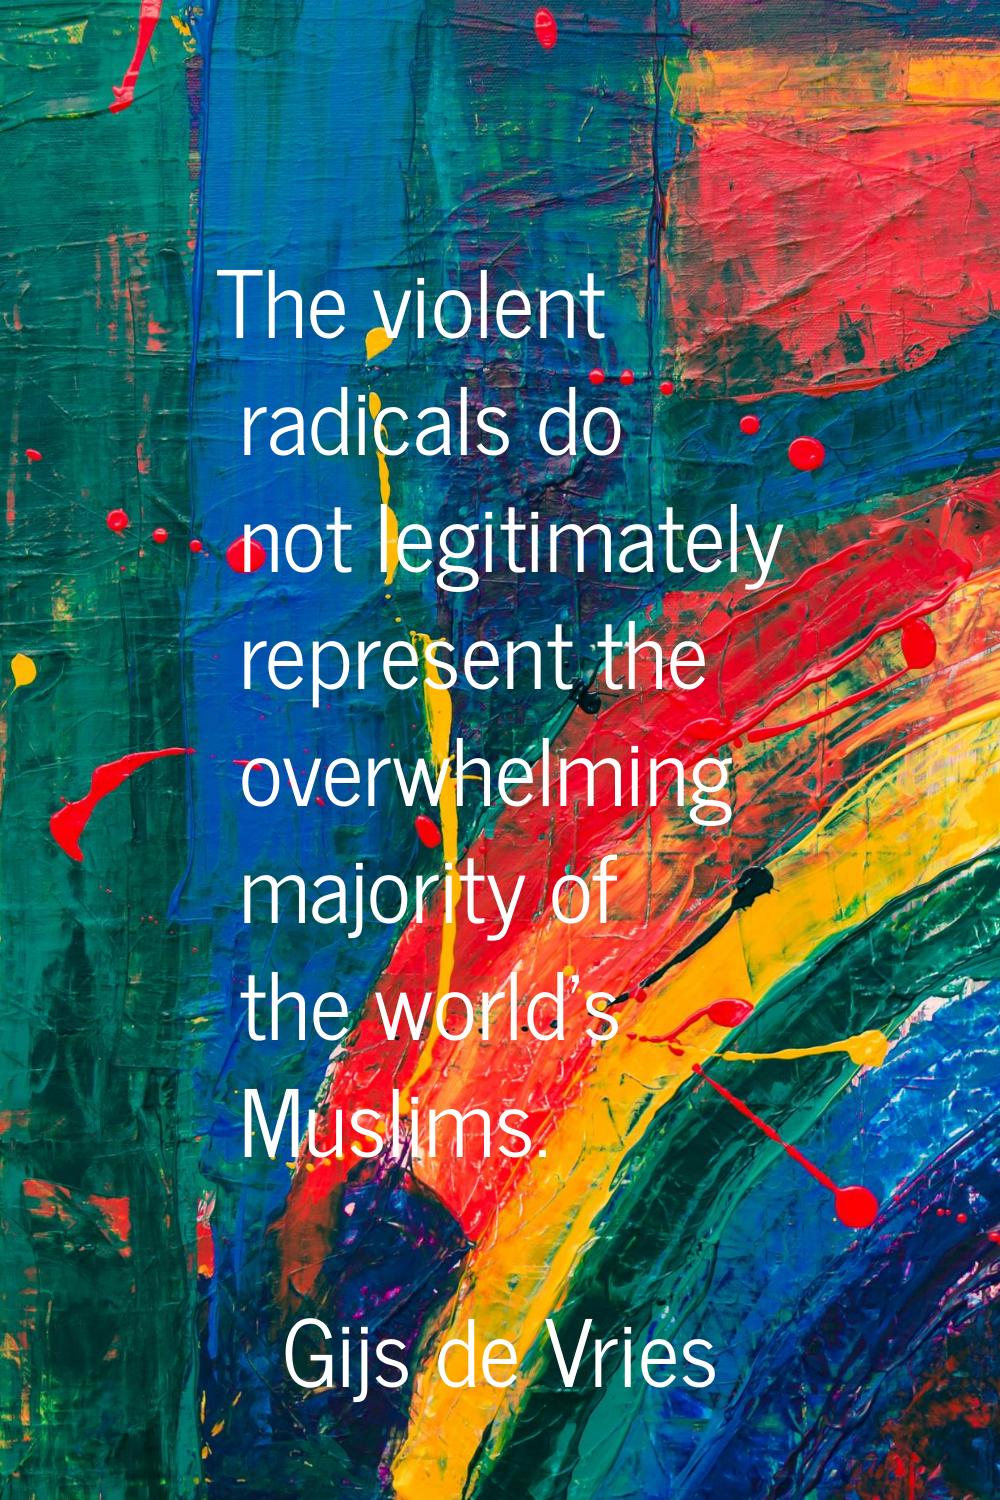 The violent radicals do not legitimately represent the overwhelming majority of the world's Muslims